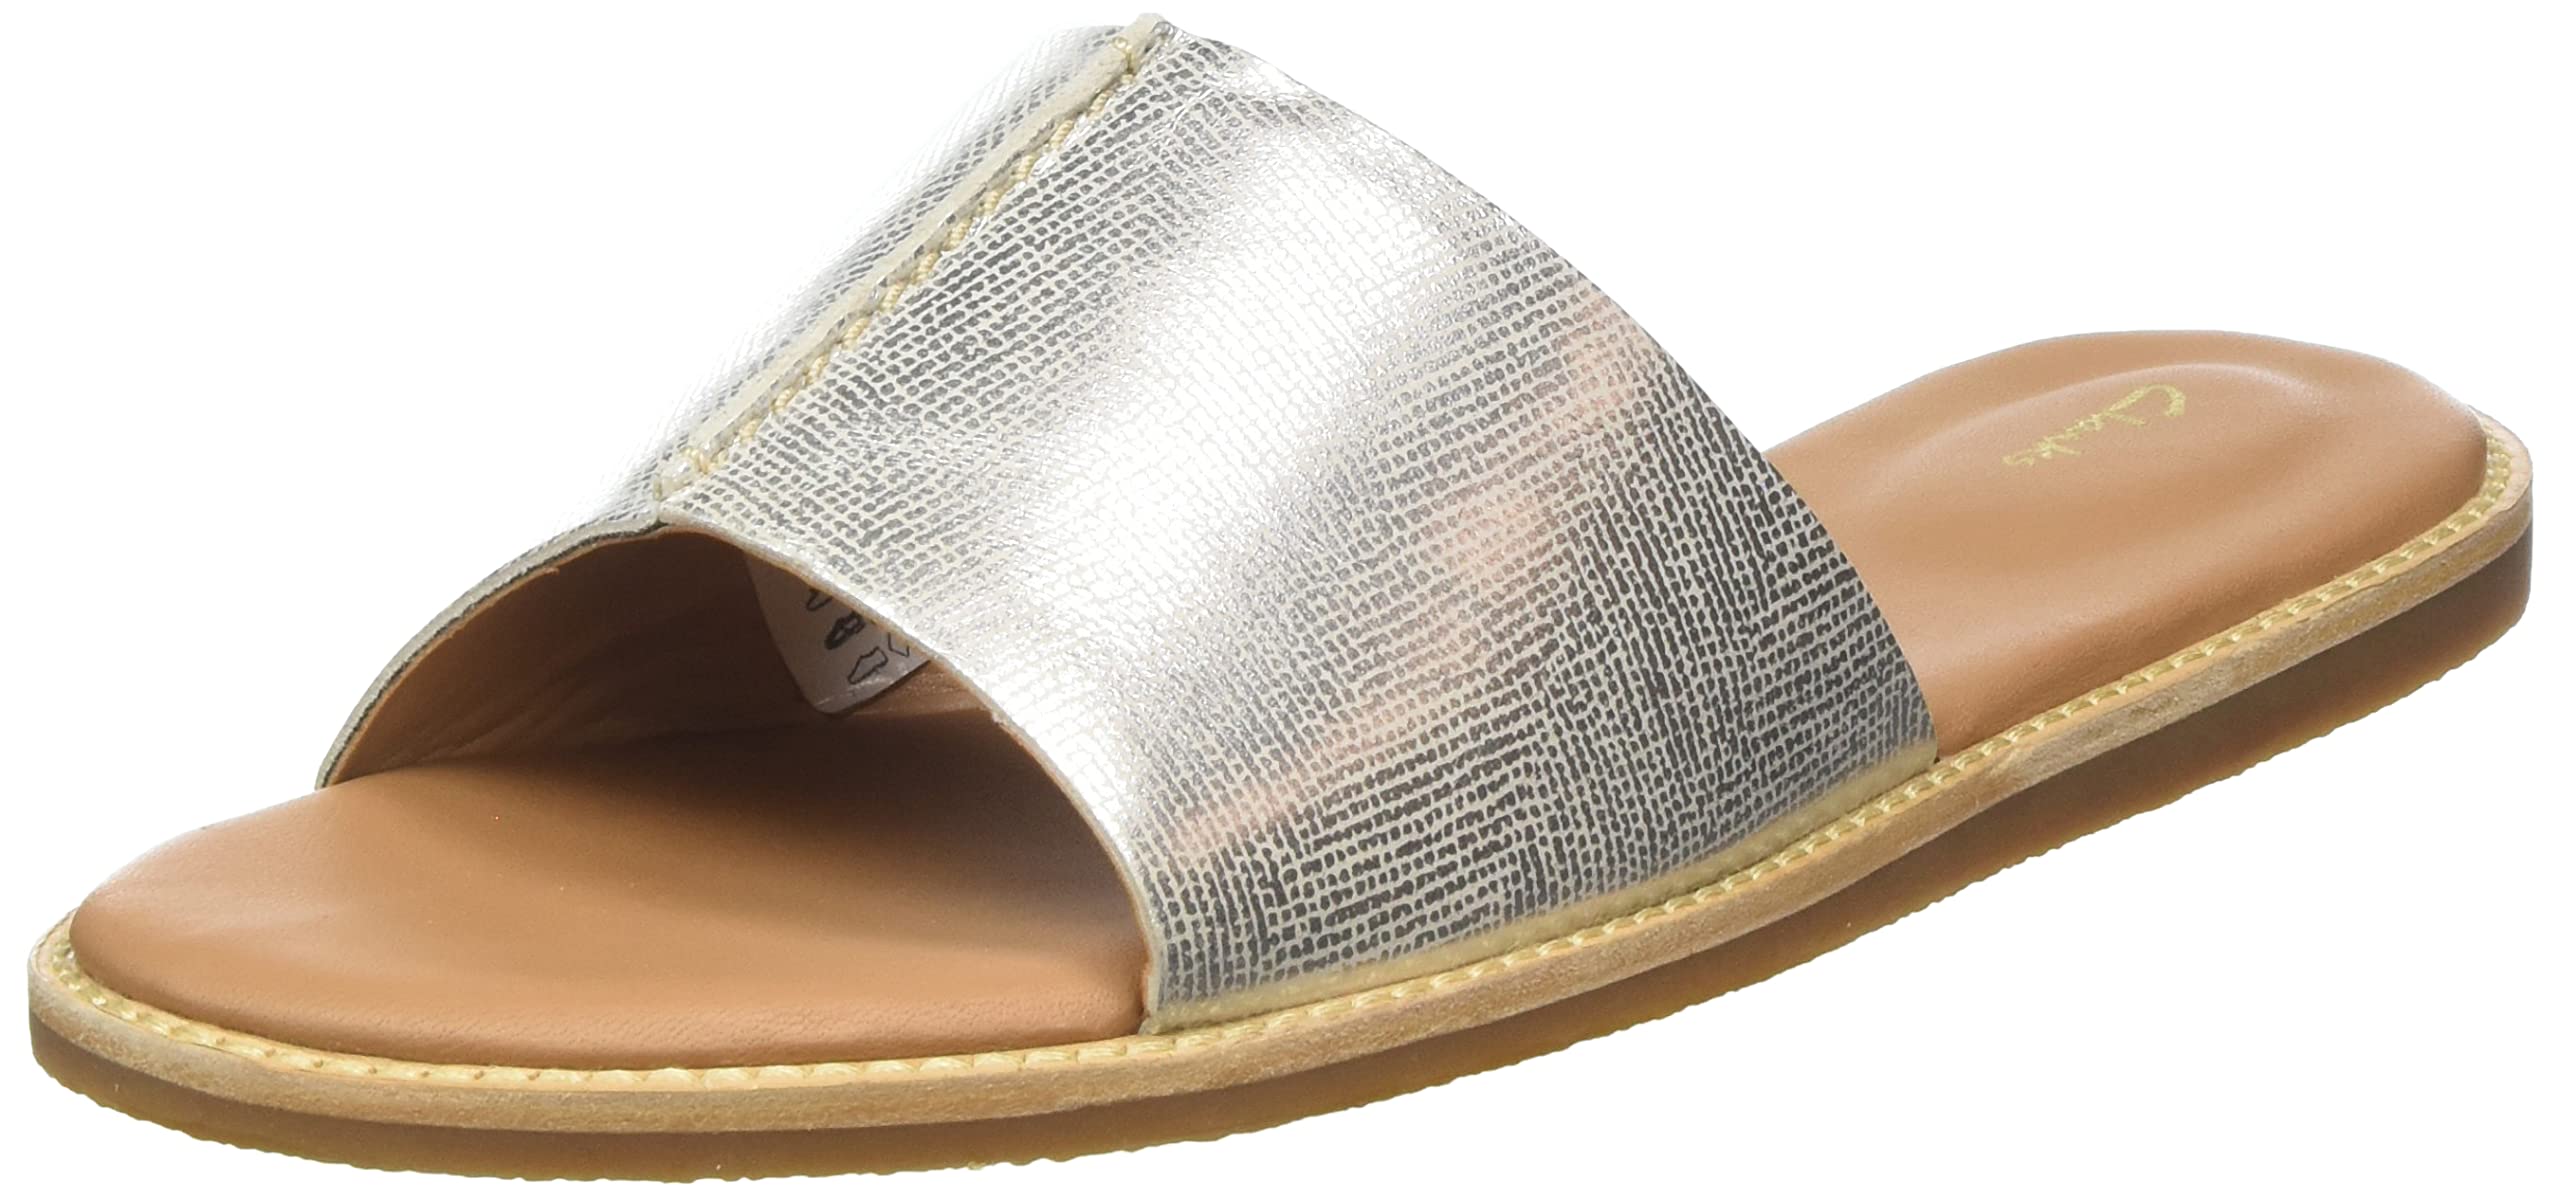 Abordable Clarks Femme Karsea Mule Sandales Claquettes wKtvqMSwn mode